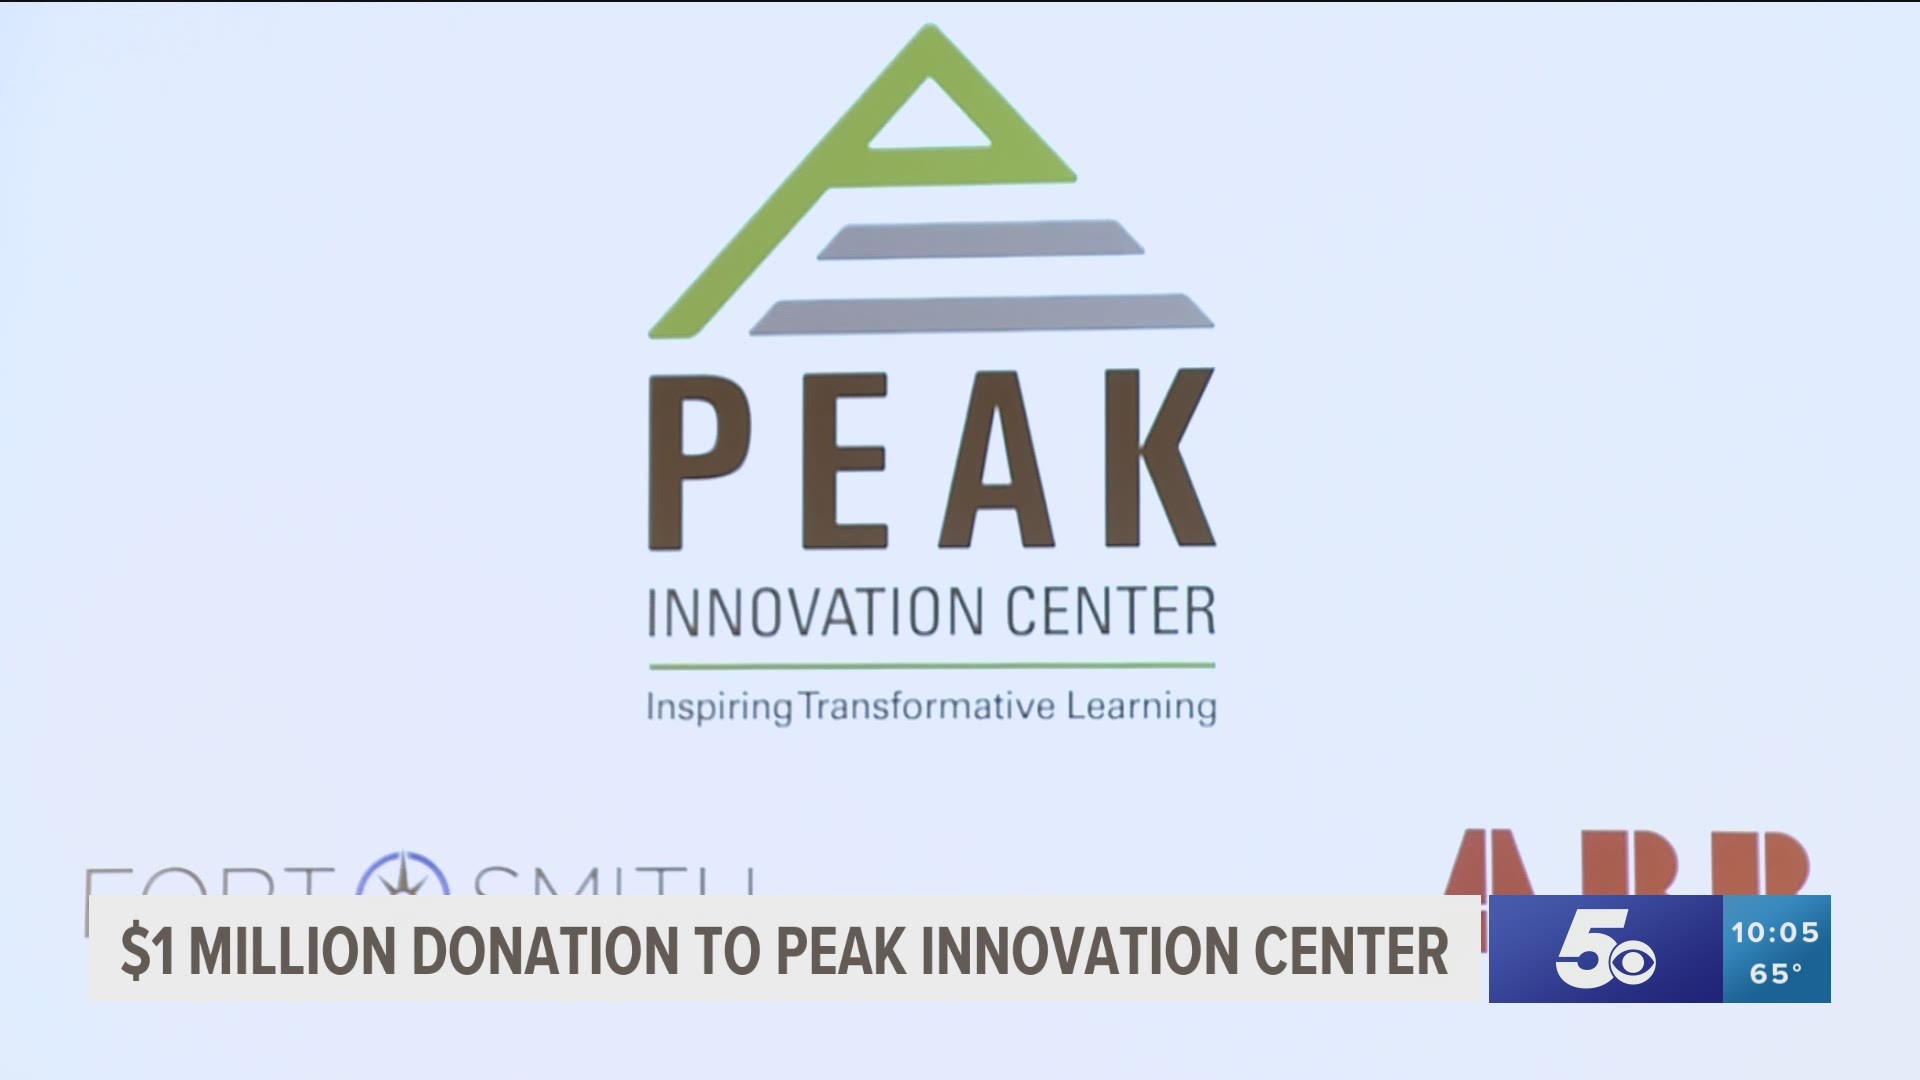 The Peak Innovation Center is scheduled to open in August.